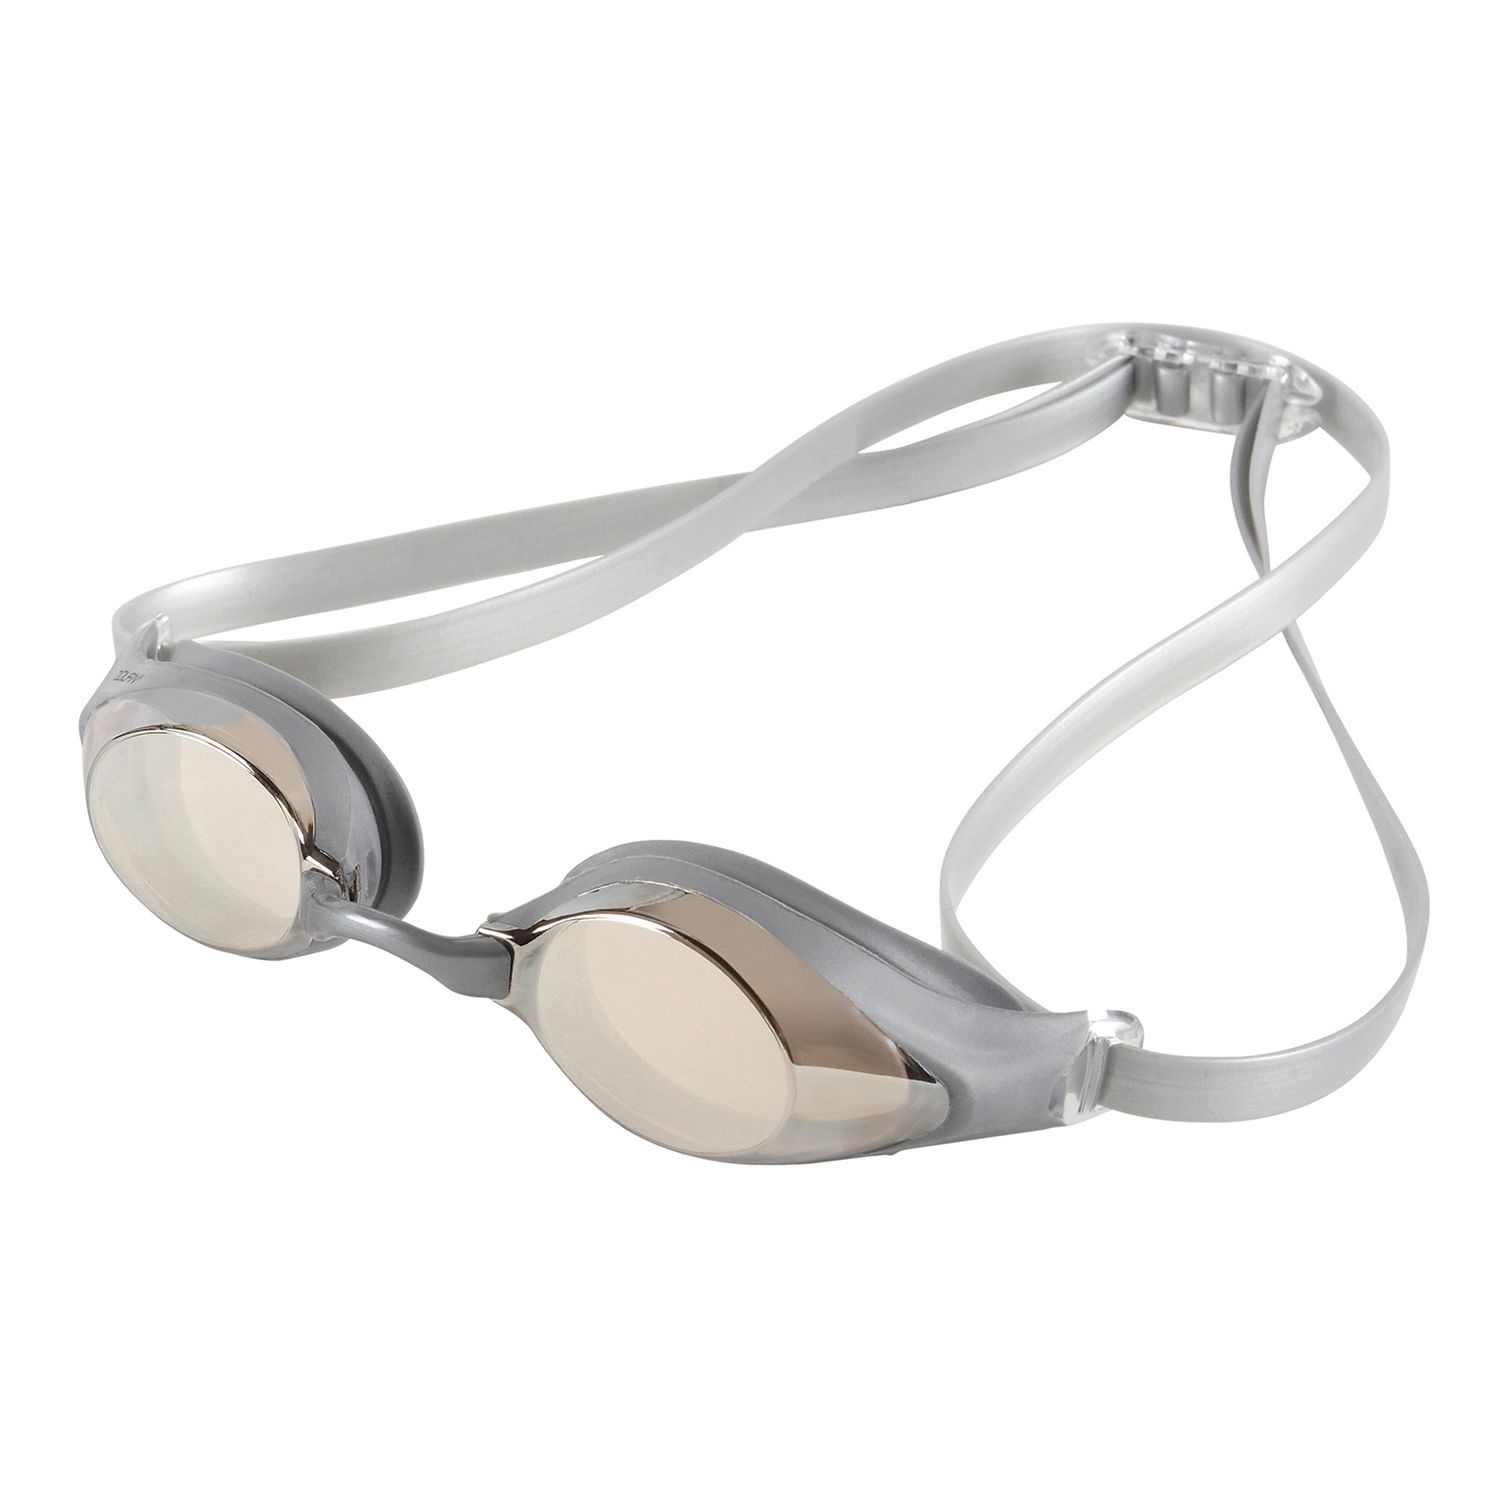 Image for Dolfin Adult Ascender Mirrored Racing Swim Goggles at Kohl's.